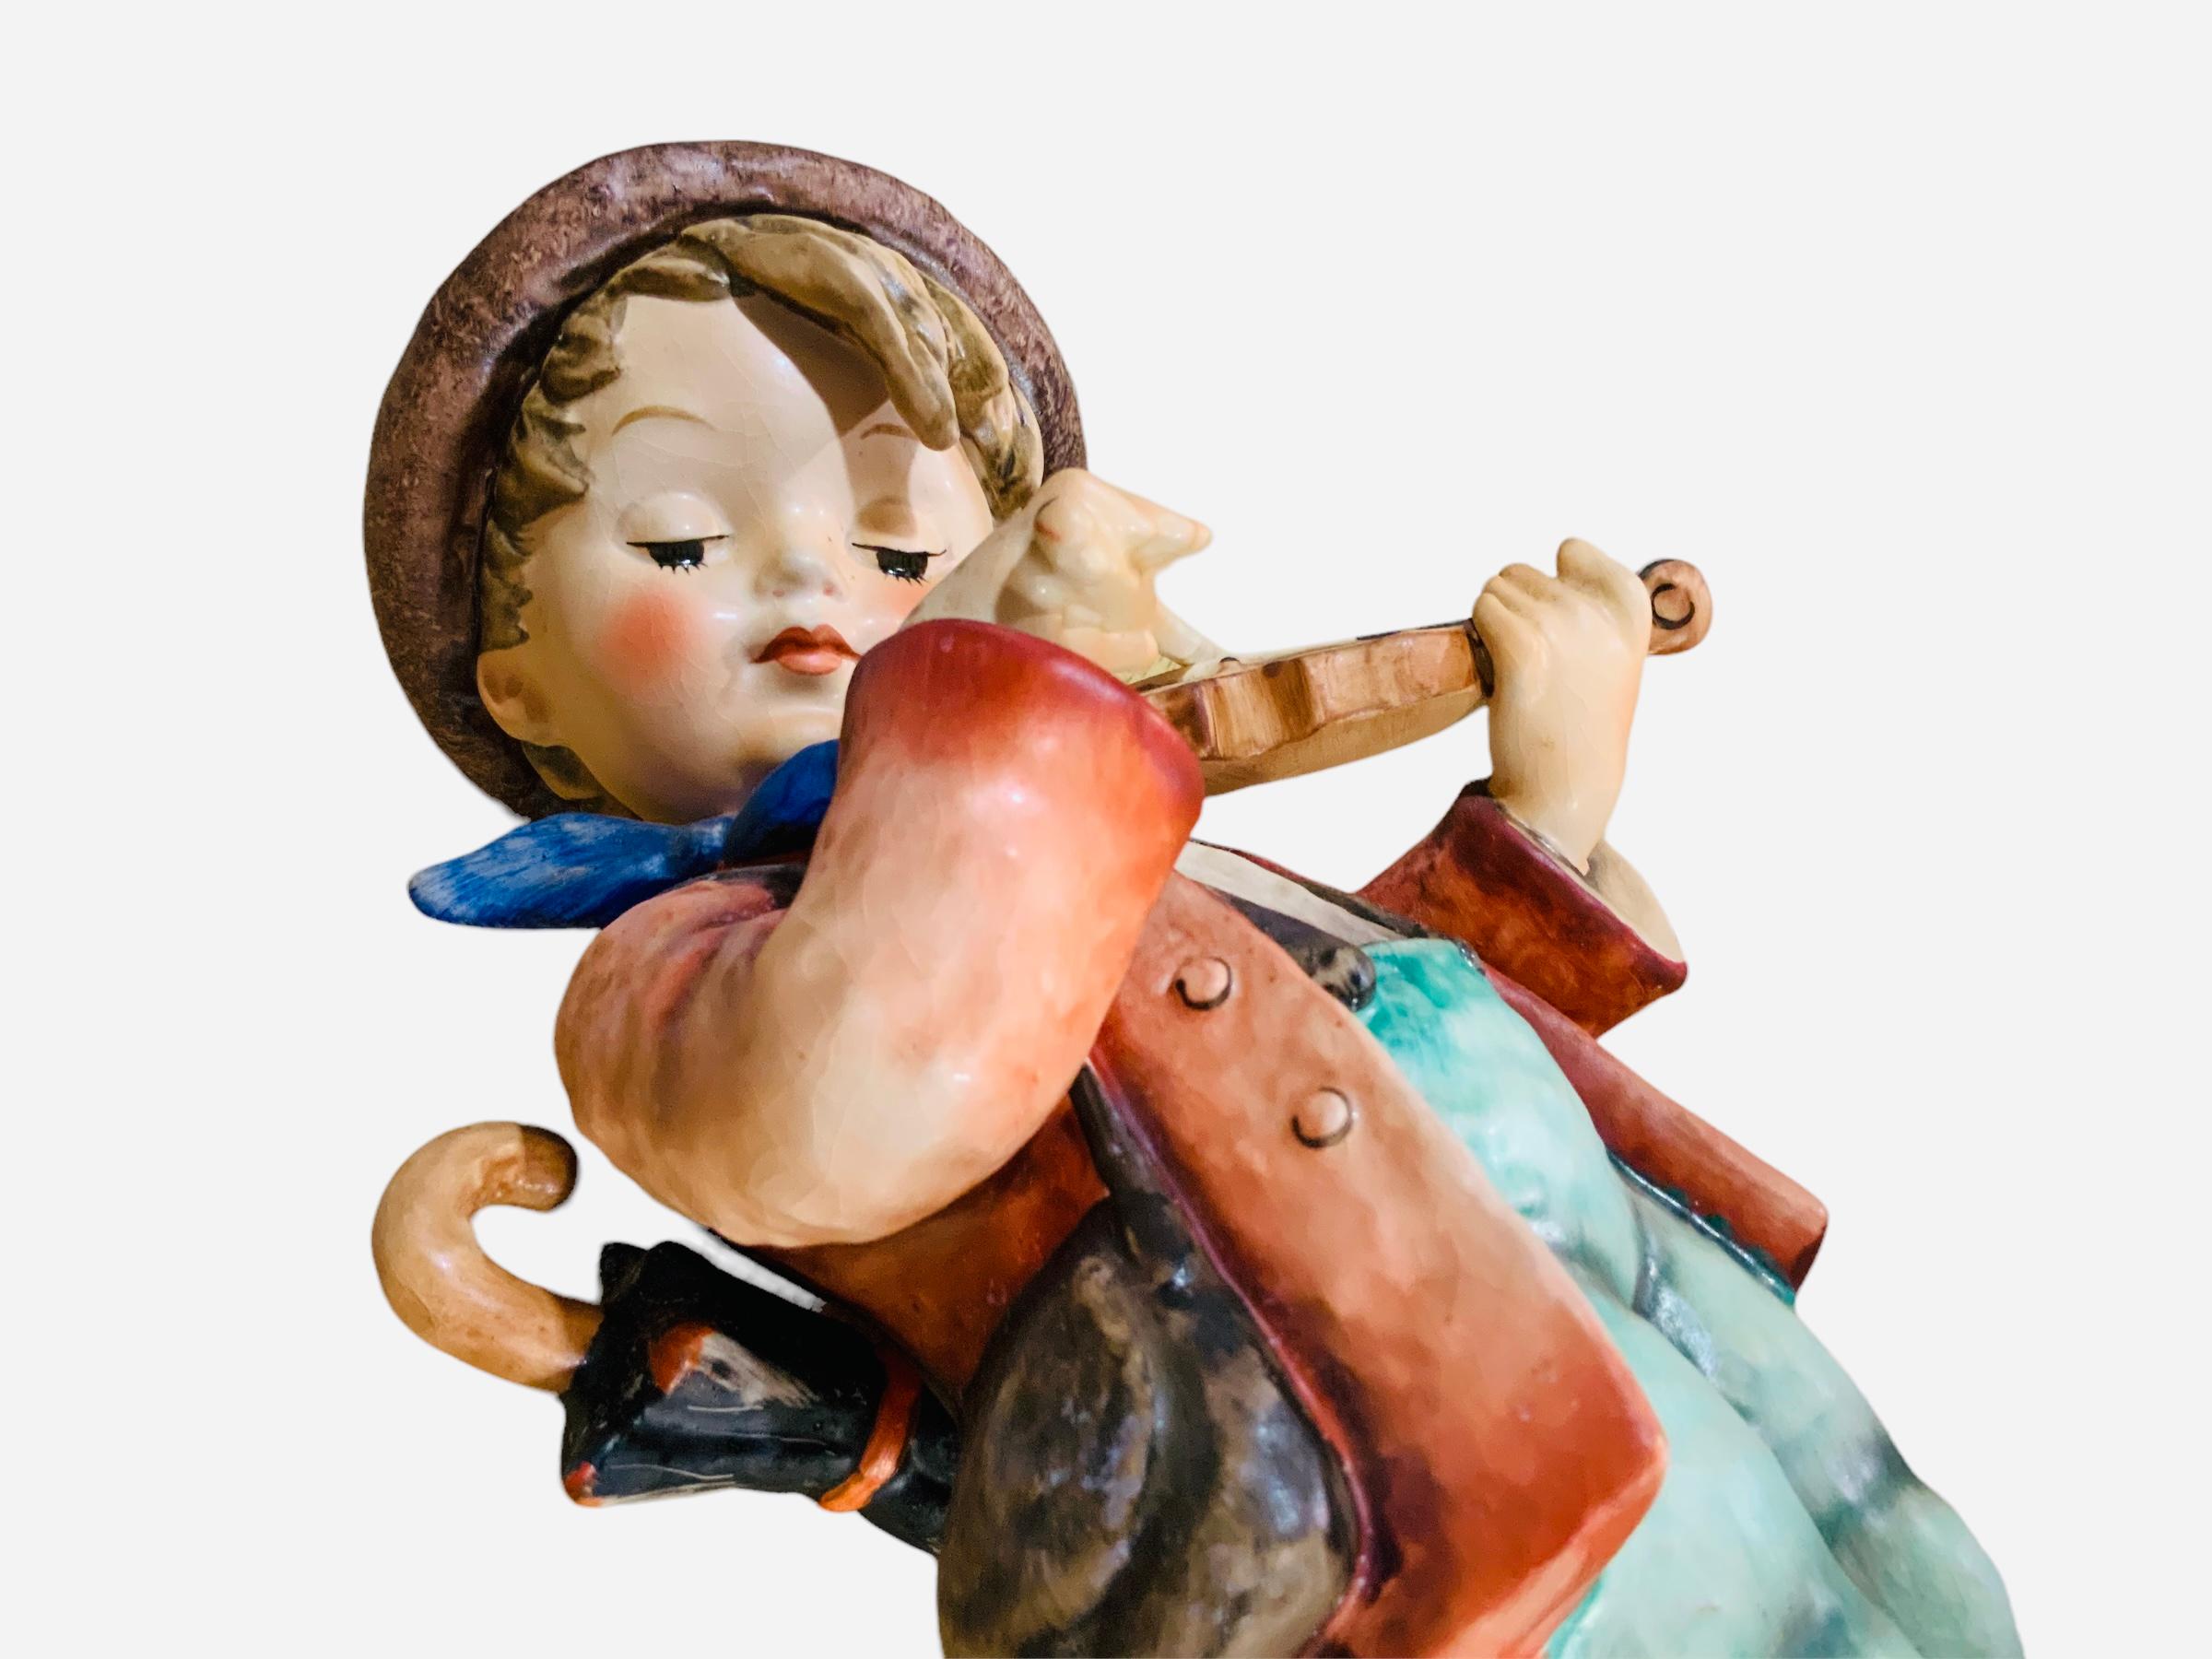 This is a Hummel porcelain figurine boy. It’s named “The Fiddler”. Its mark is TMK5 (1970’s). The inscription M.I. Hummel is in the back of the figurine. The trademark of Goebel company is below the base with the year 1972 inscribed.